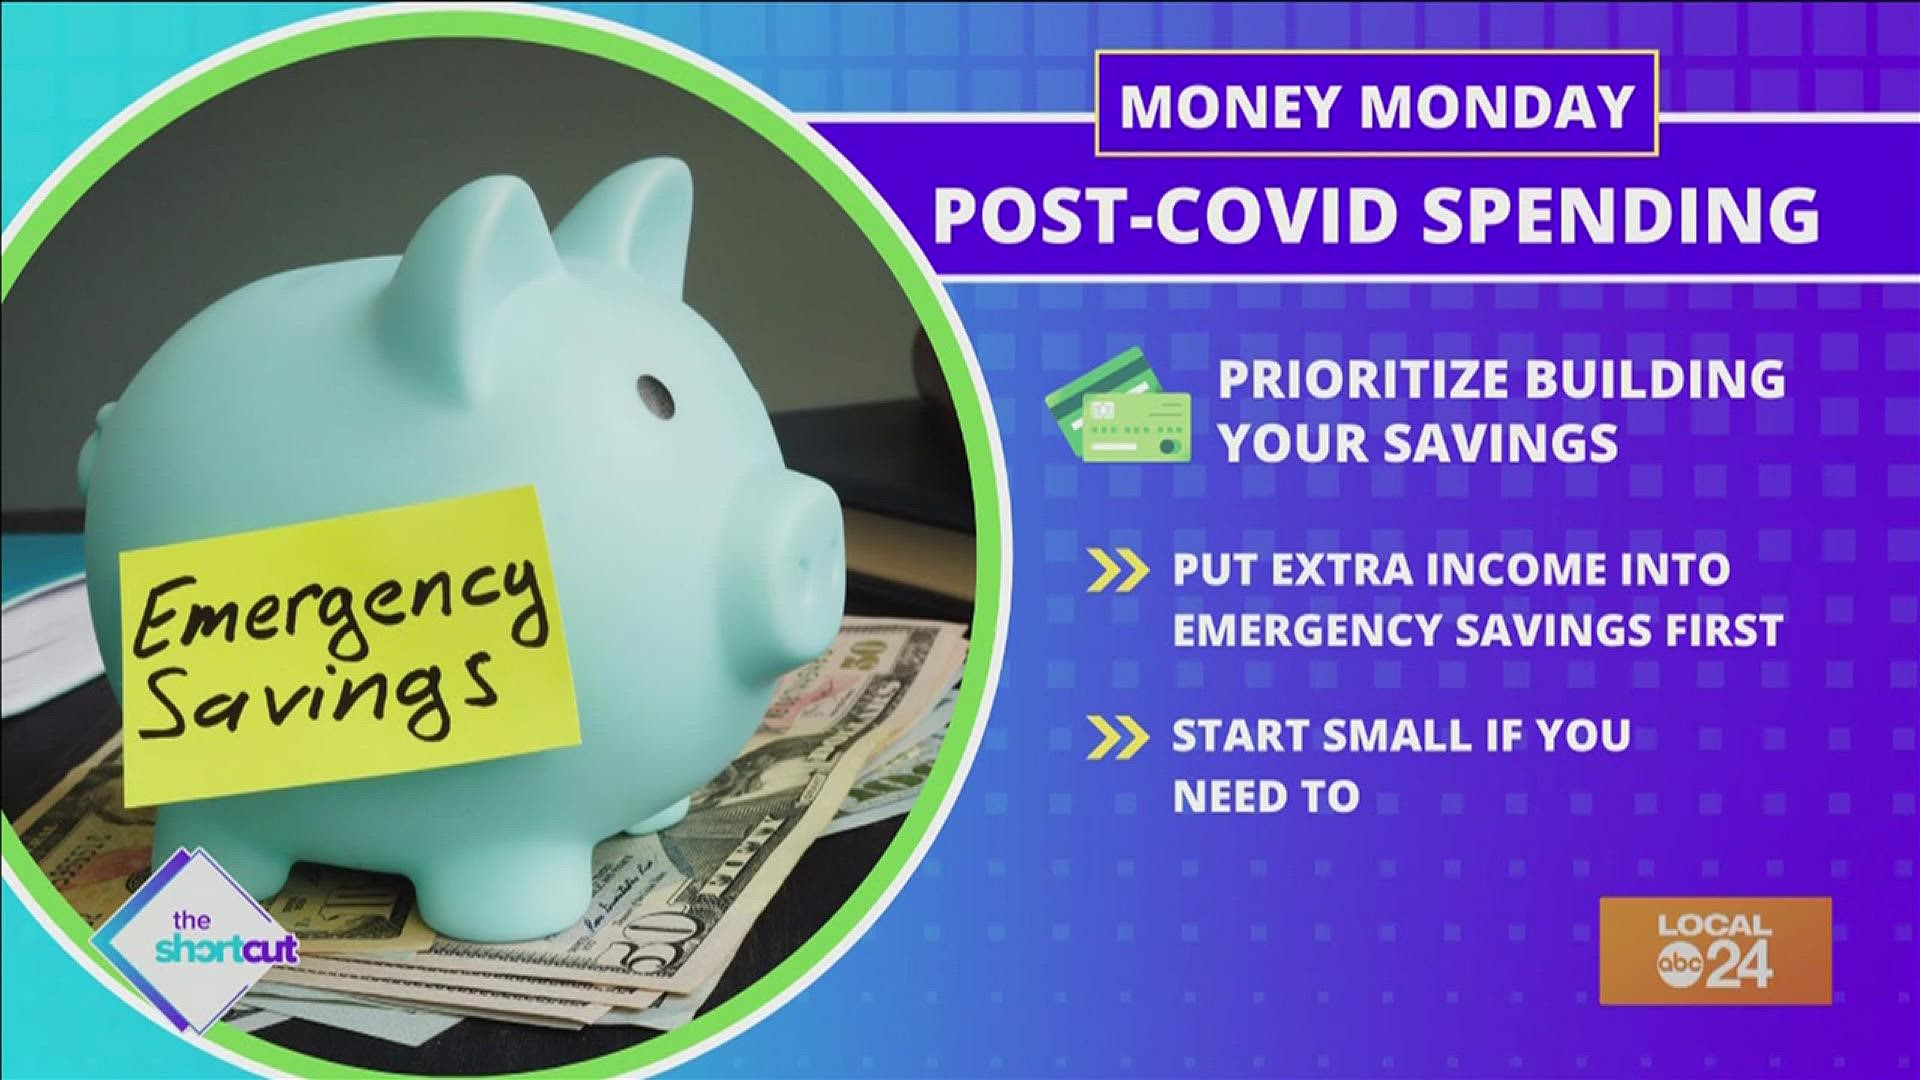 From keeping your emotions away from your money to staying off of social media for awhile, learn "The Shortcut's" on how to save money in a post-pandemic world!